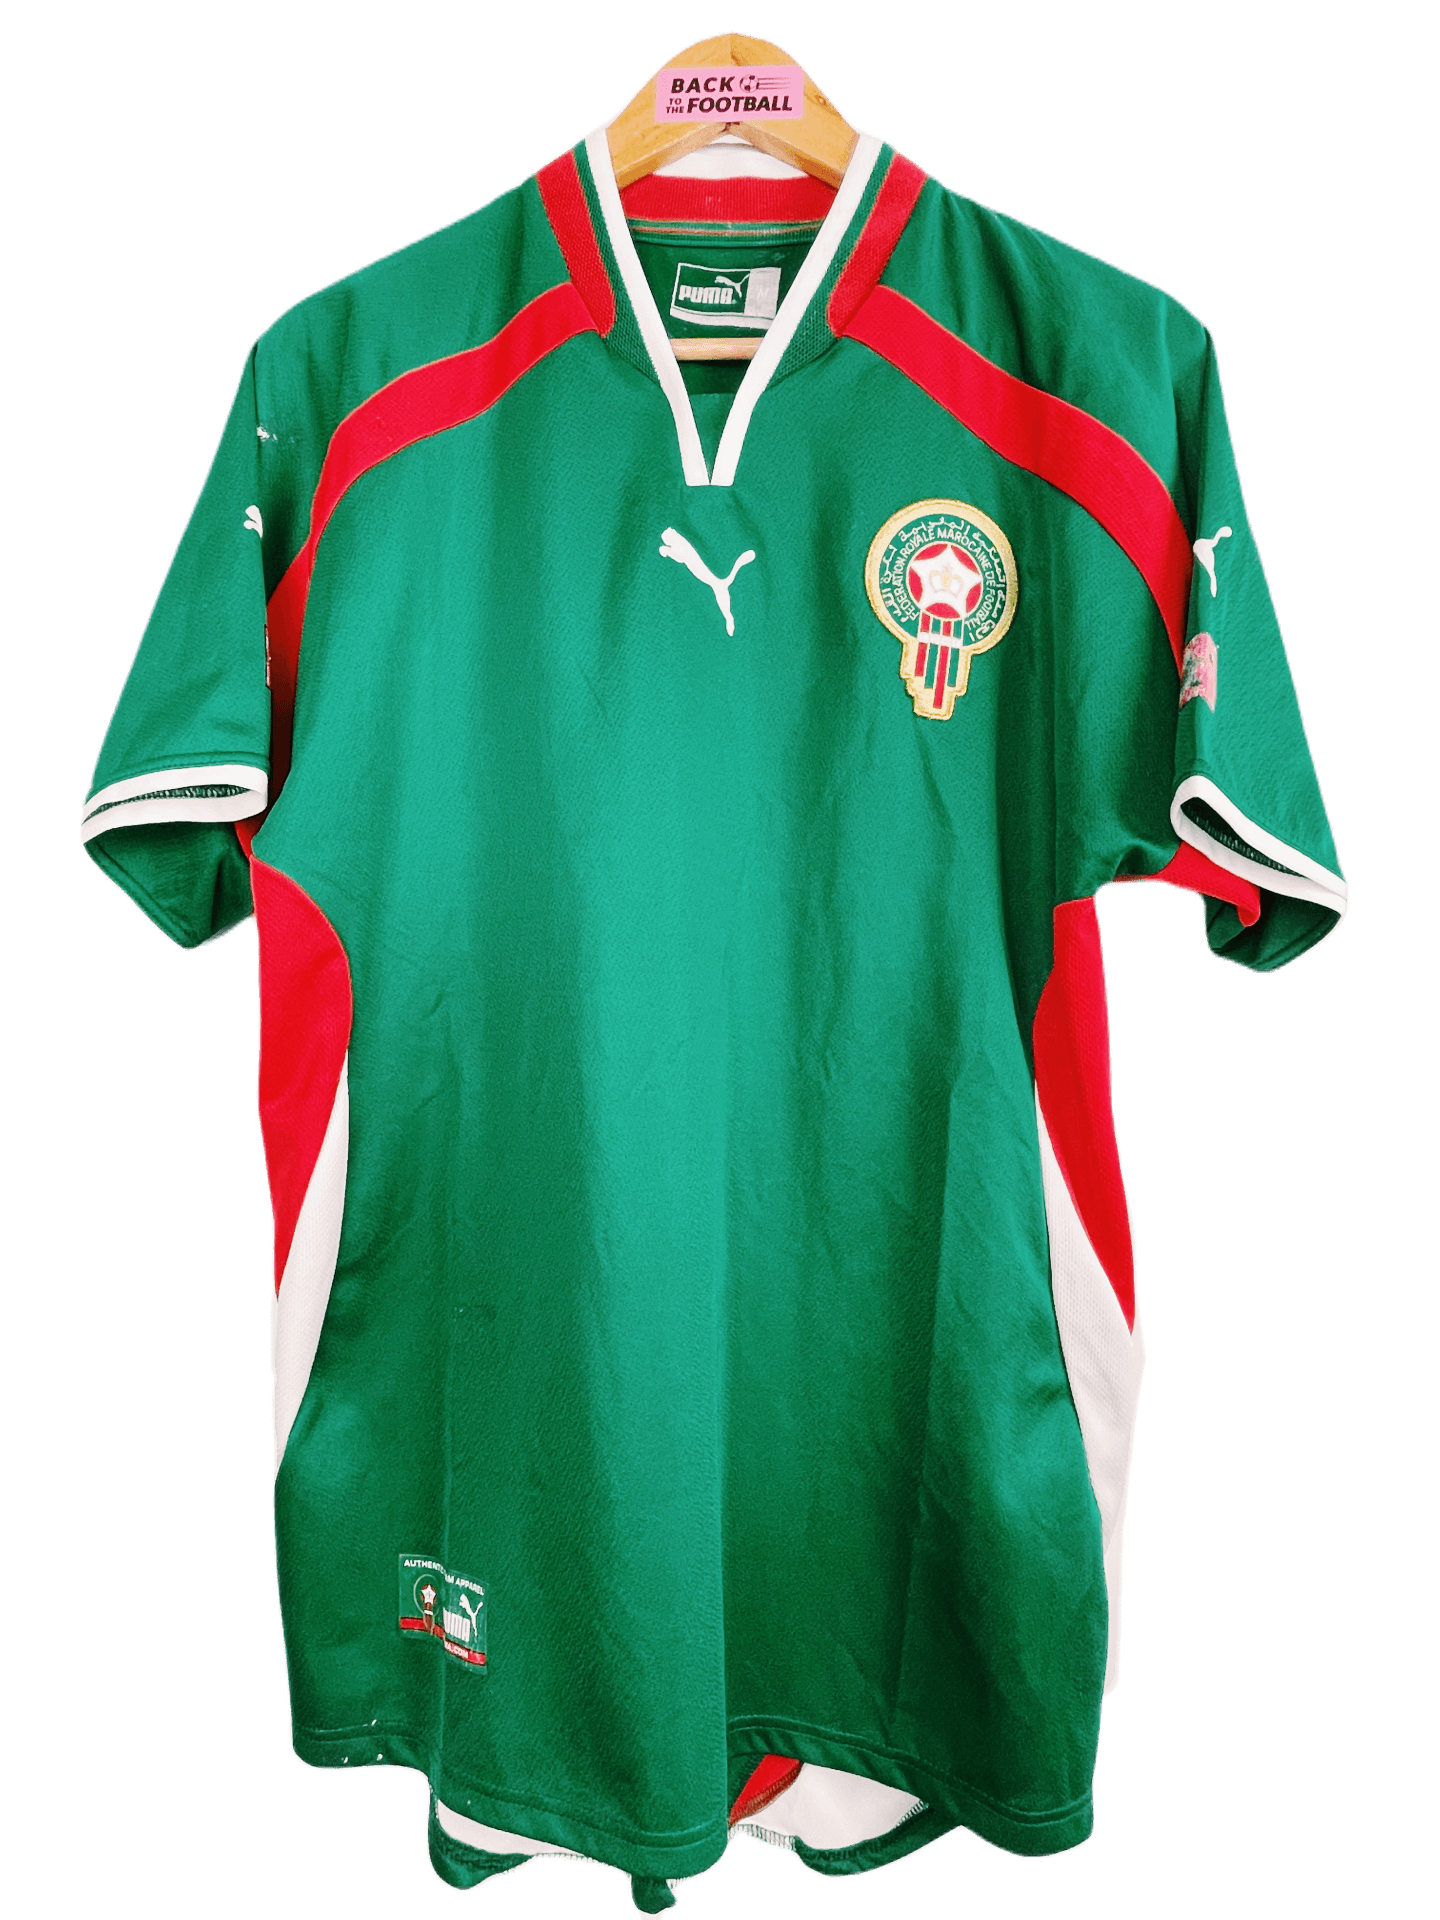 Maillot vintage 2000 / 2001 - Maroc (M) - Back To The Football